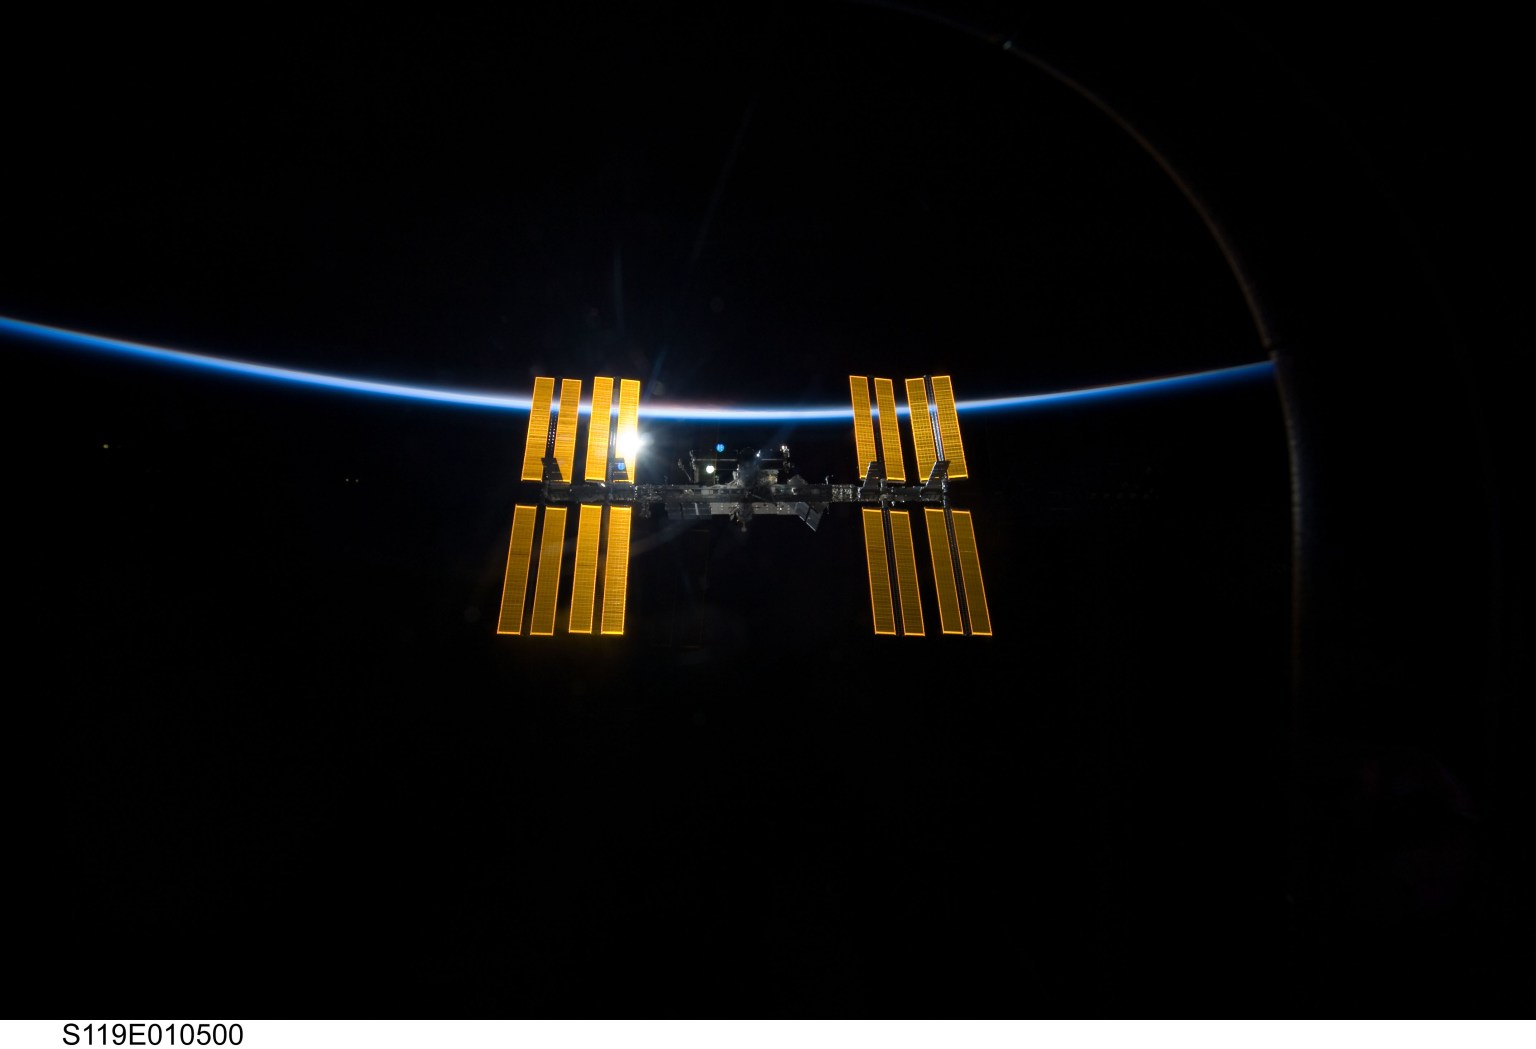 Photograph of the International Space Station.